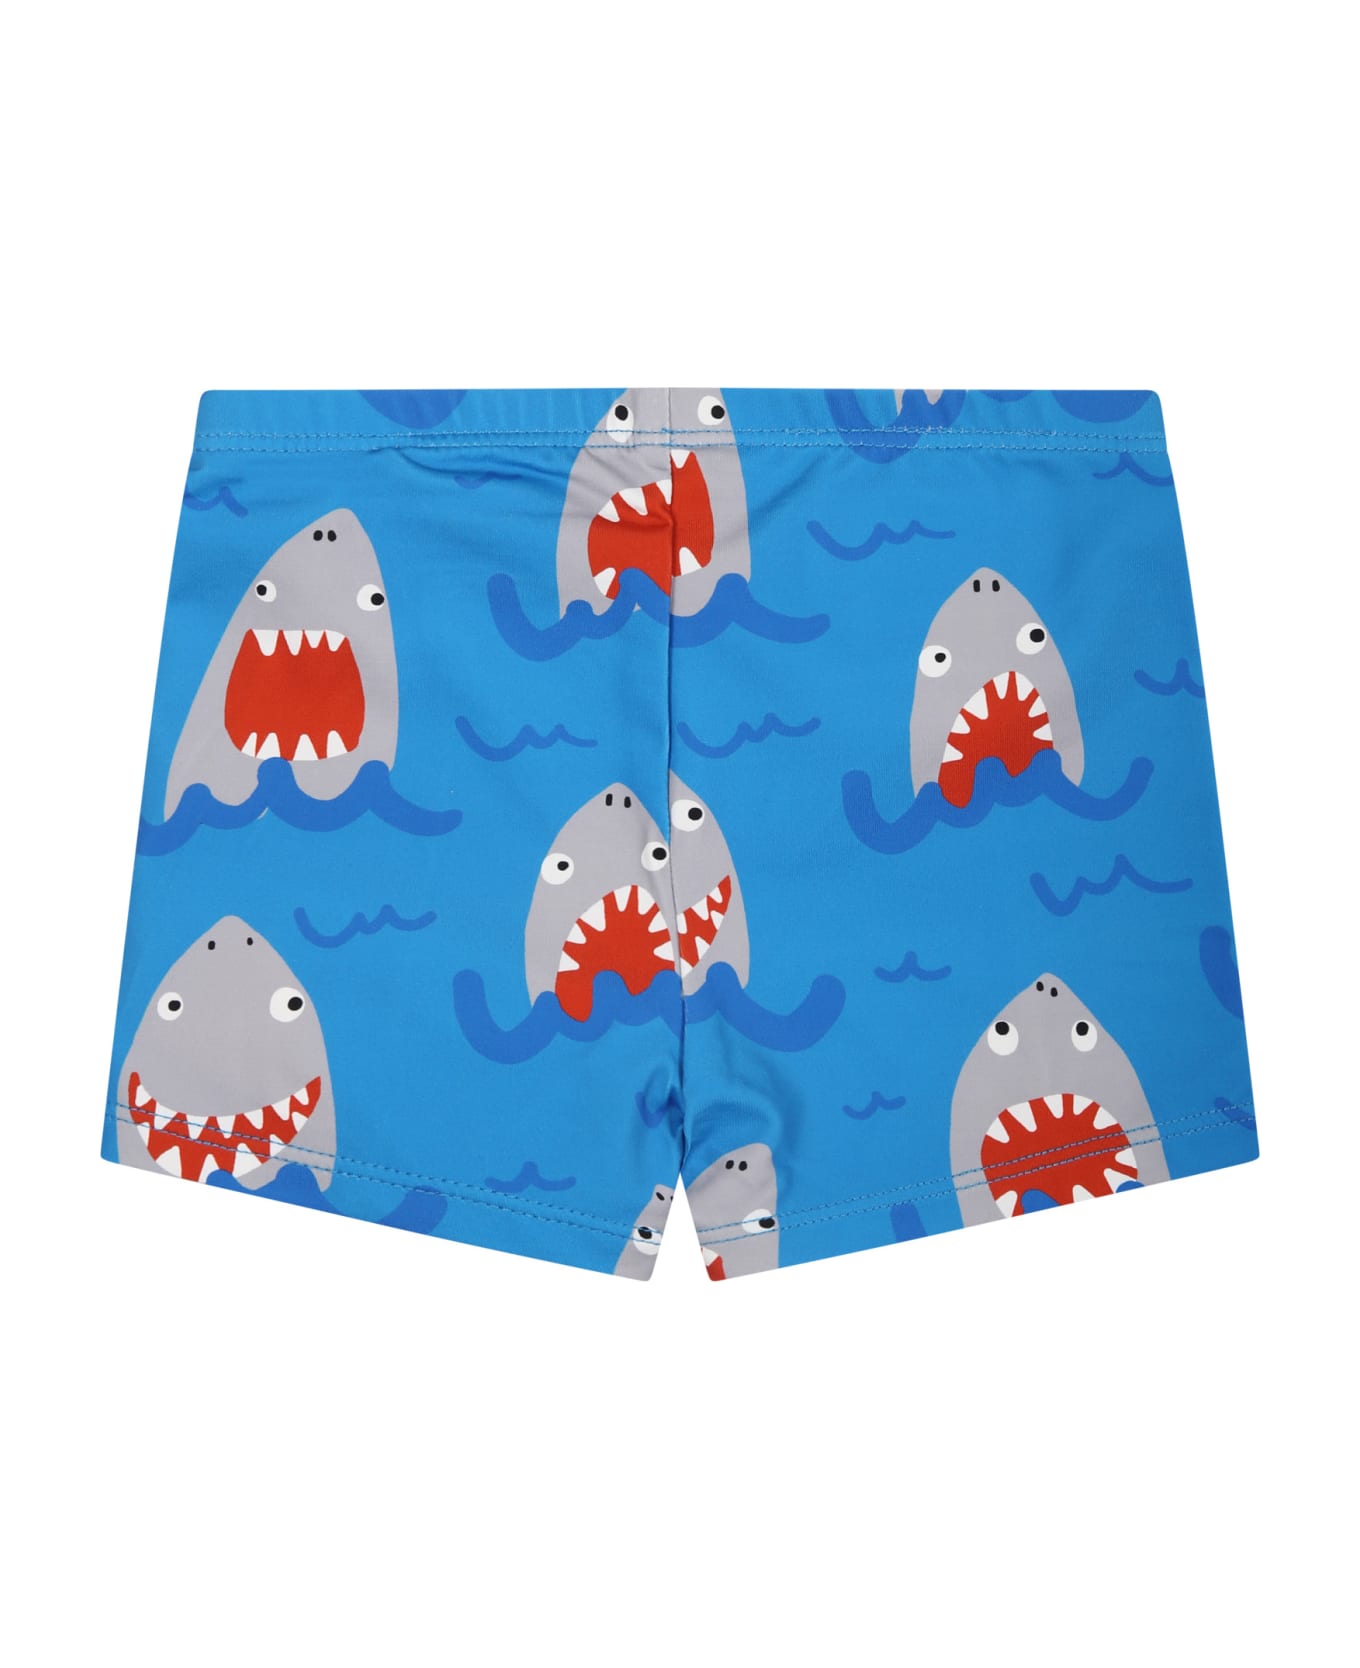 Stella McCartney Kids Light Blue Boxer Shorts For Baby Boy With All-over Shark Print - BLUE